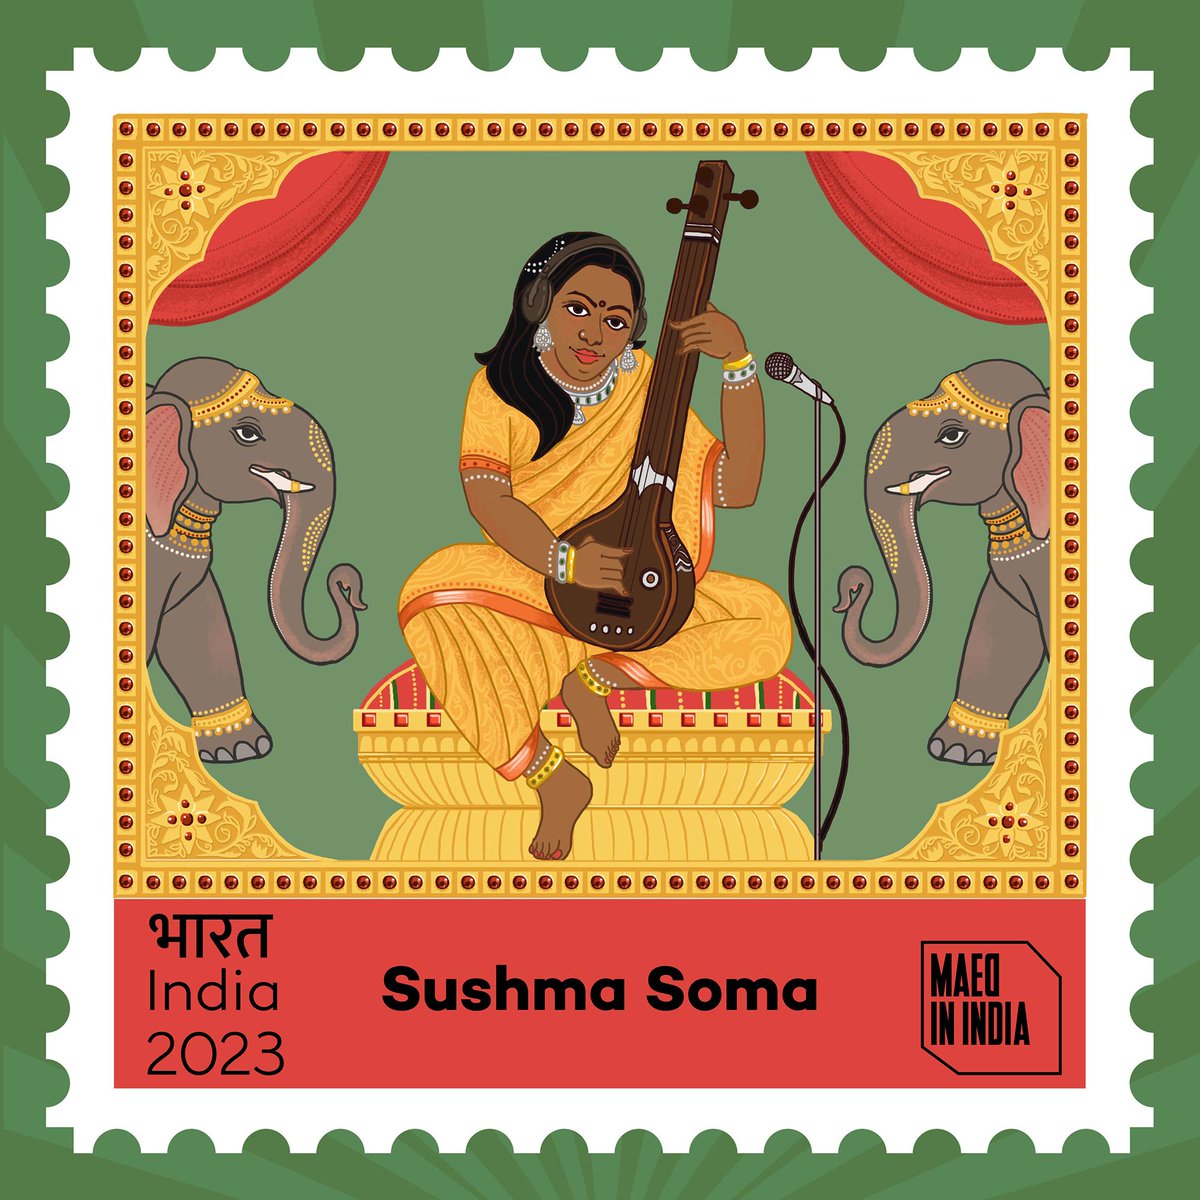 Got the chance to make some folk art inspired work for @maedinindia 's Ladies Special month long celebration of musicians! Pretty happy with how the art turned out! Links to listen to the episodes and the fantastic music here
maedinindia.fanlink.to/podcast